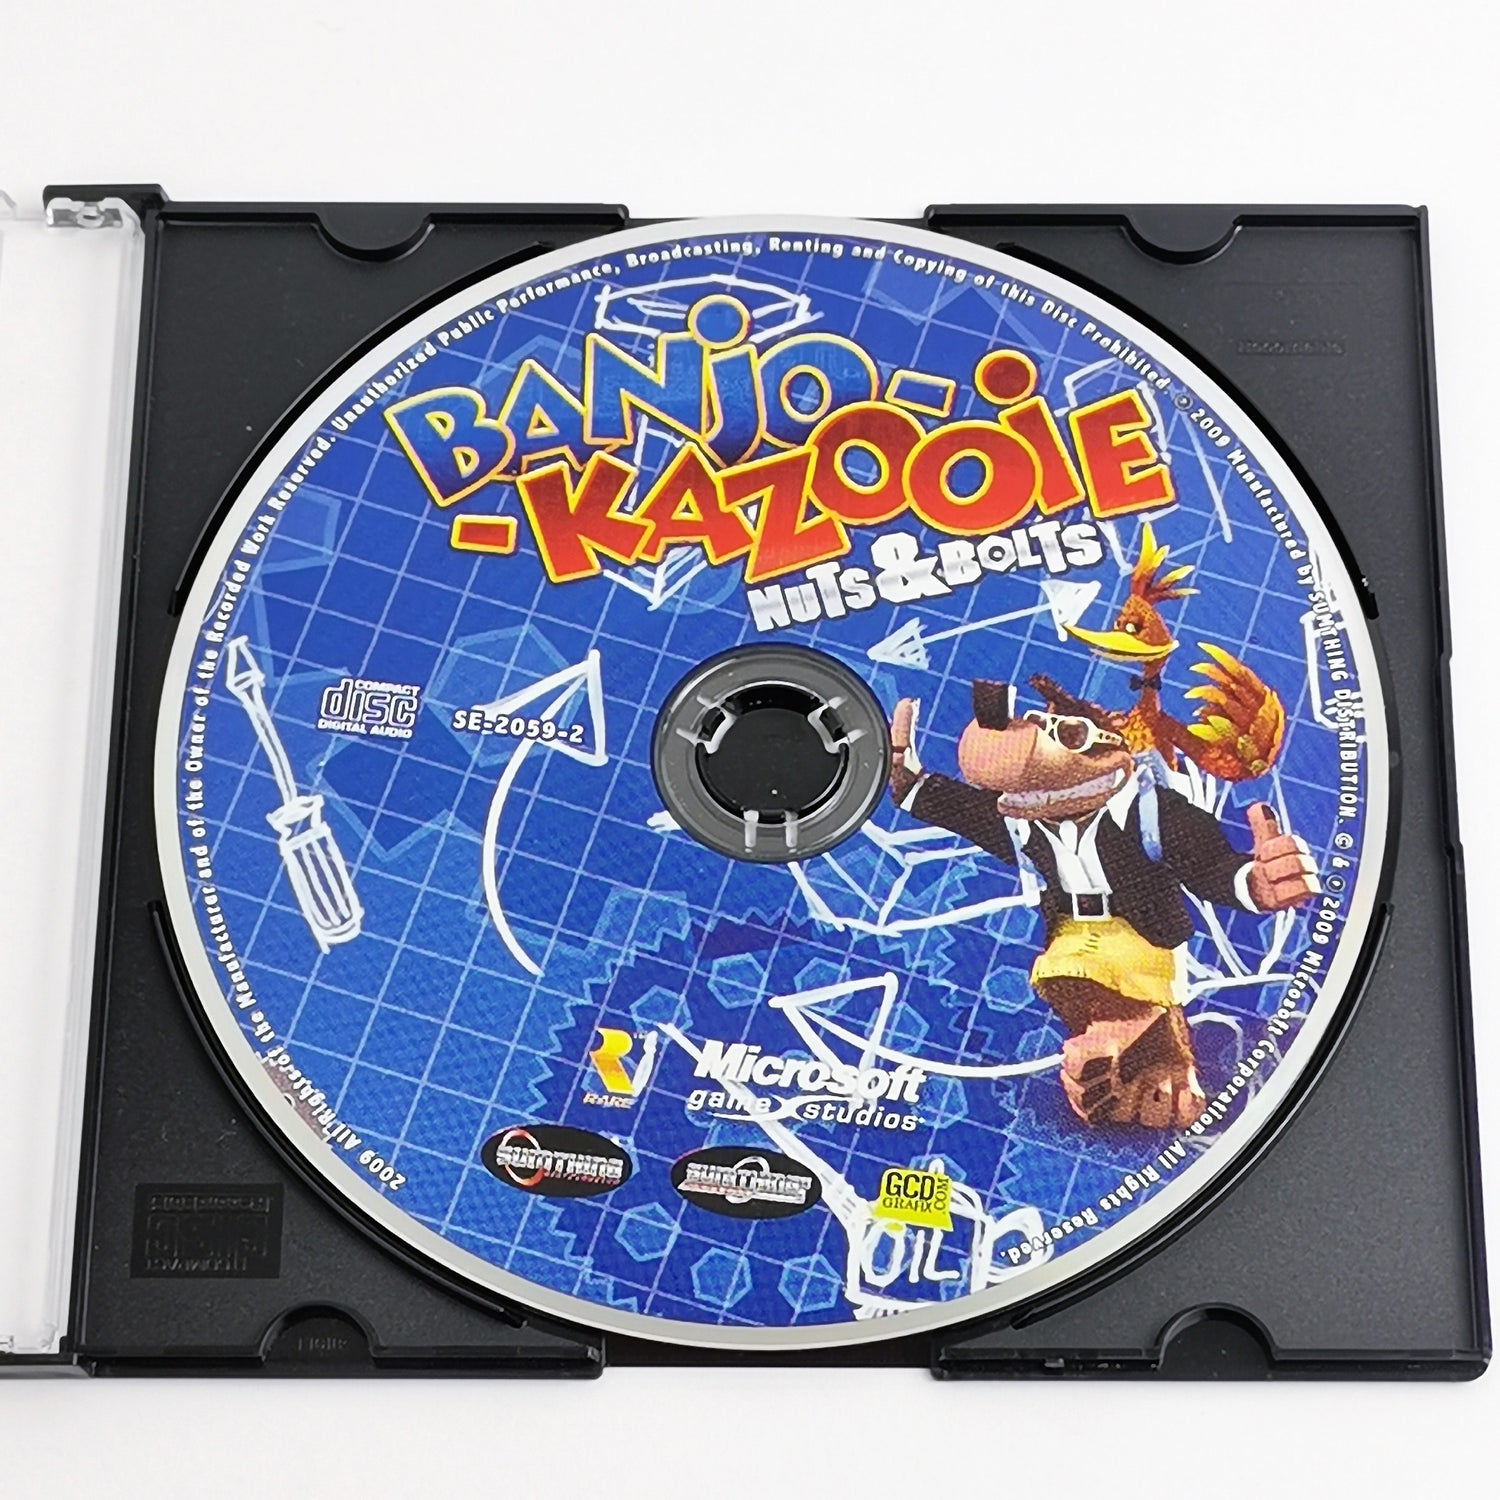 Audio soundtrack CD for the game: Banjo Kazooie Nuts & Bolts | Xbox